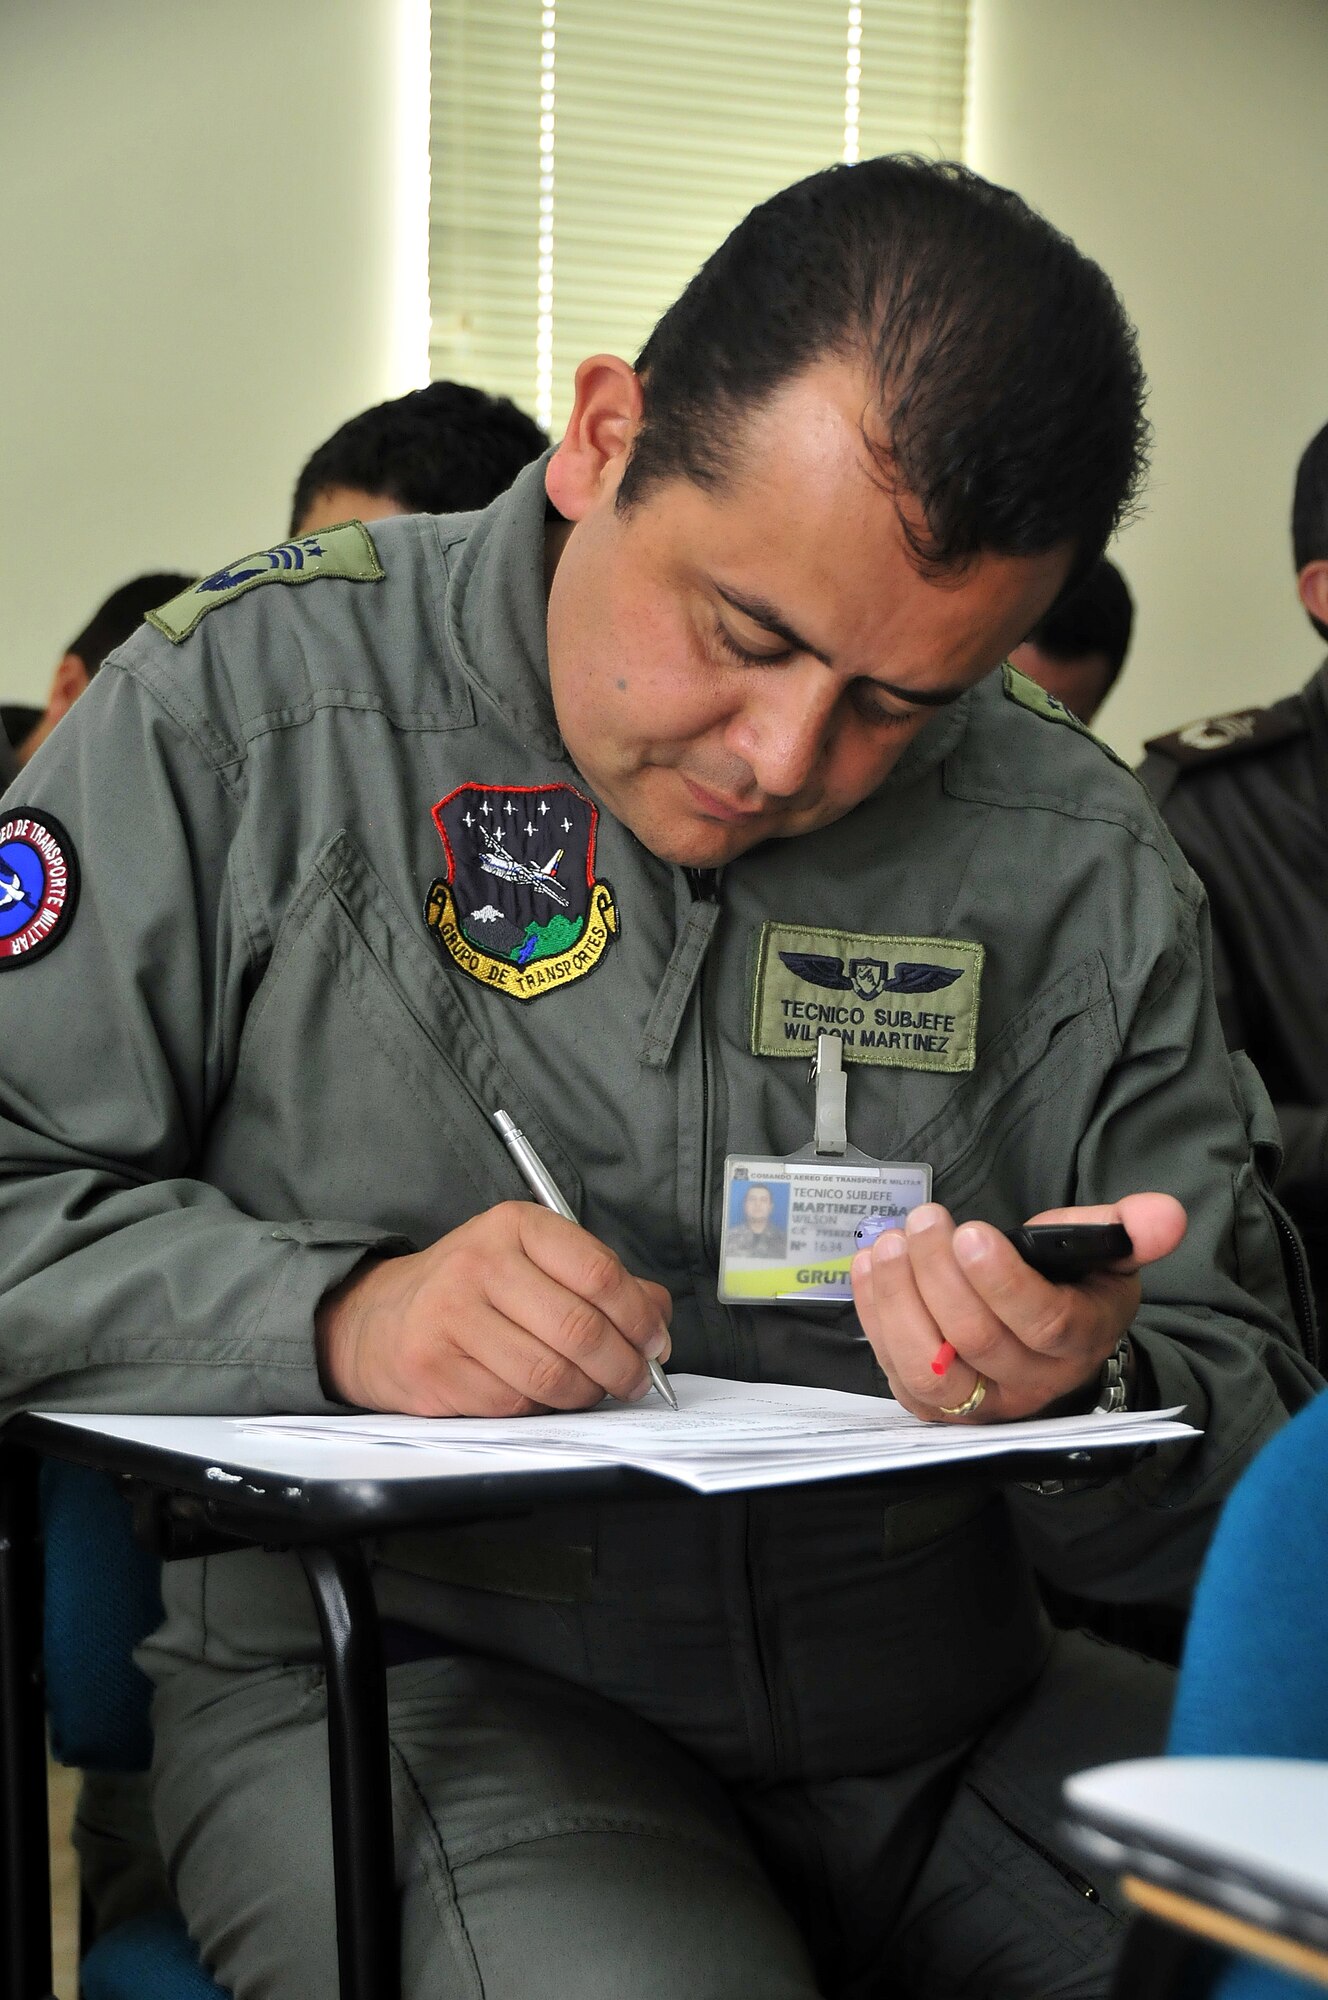 Técnico Subjefe Wilson Martinez, Colombian air force, completes the center of balance handout during a seminar June 6 at Commando Aéreo de Transporte Militar, Bogota, Colombia.  (U.S. Air Force photo by Tech. Sgt. Lesley Waters)